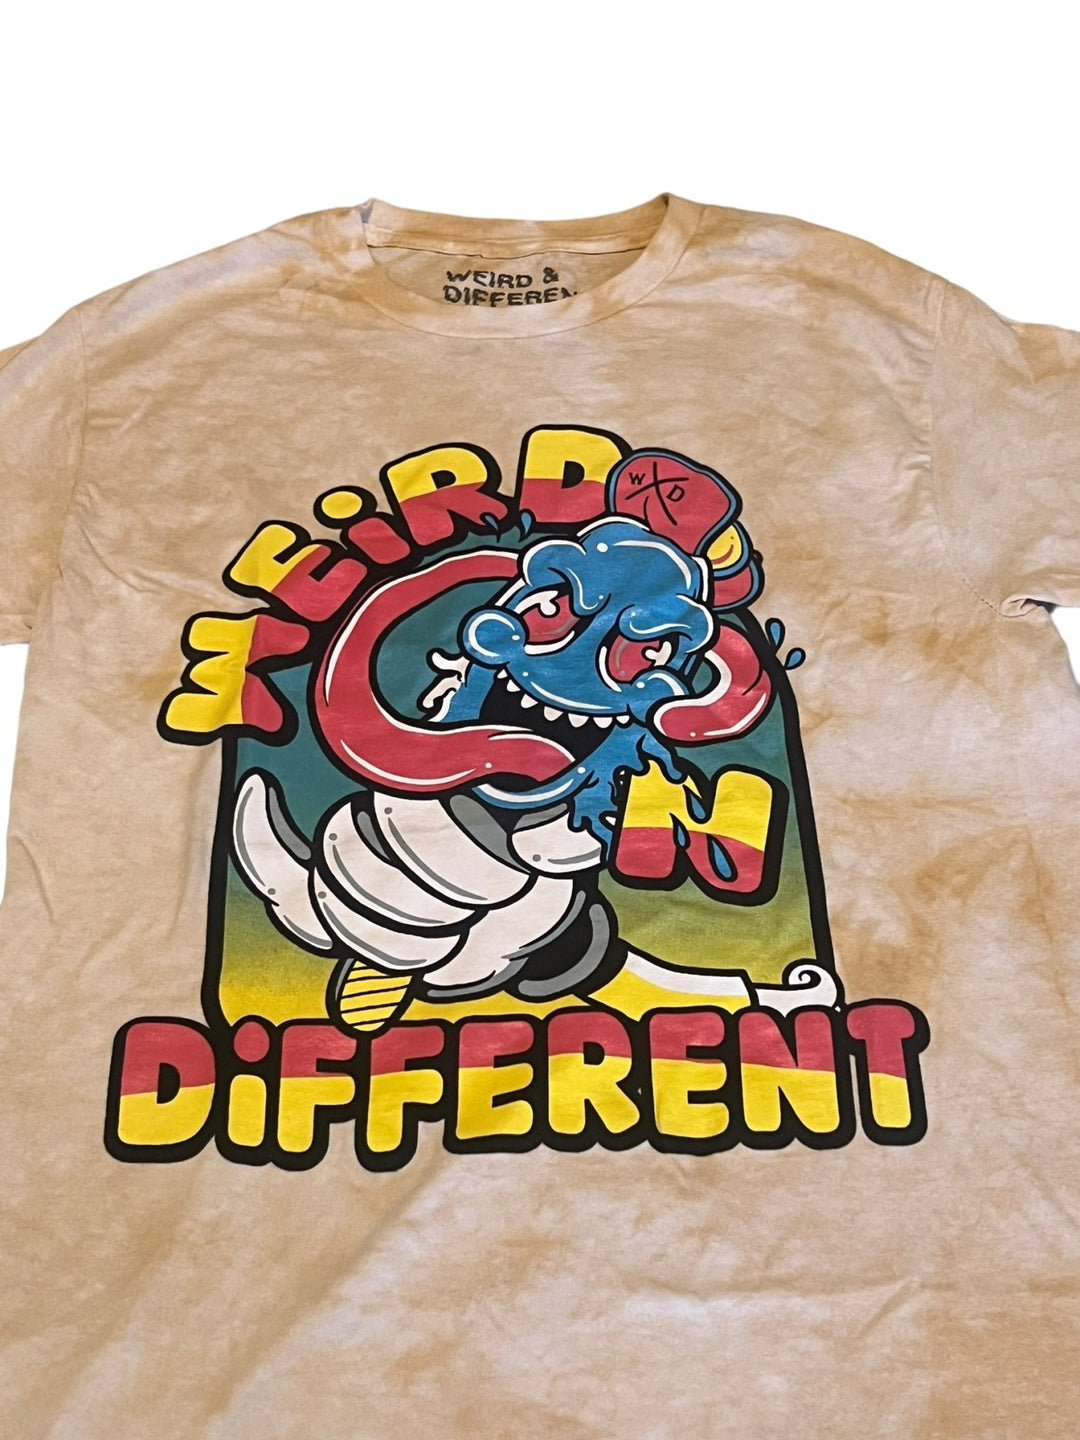 Local Menace Popsicle Tie dye tee - Weird & Different